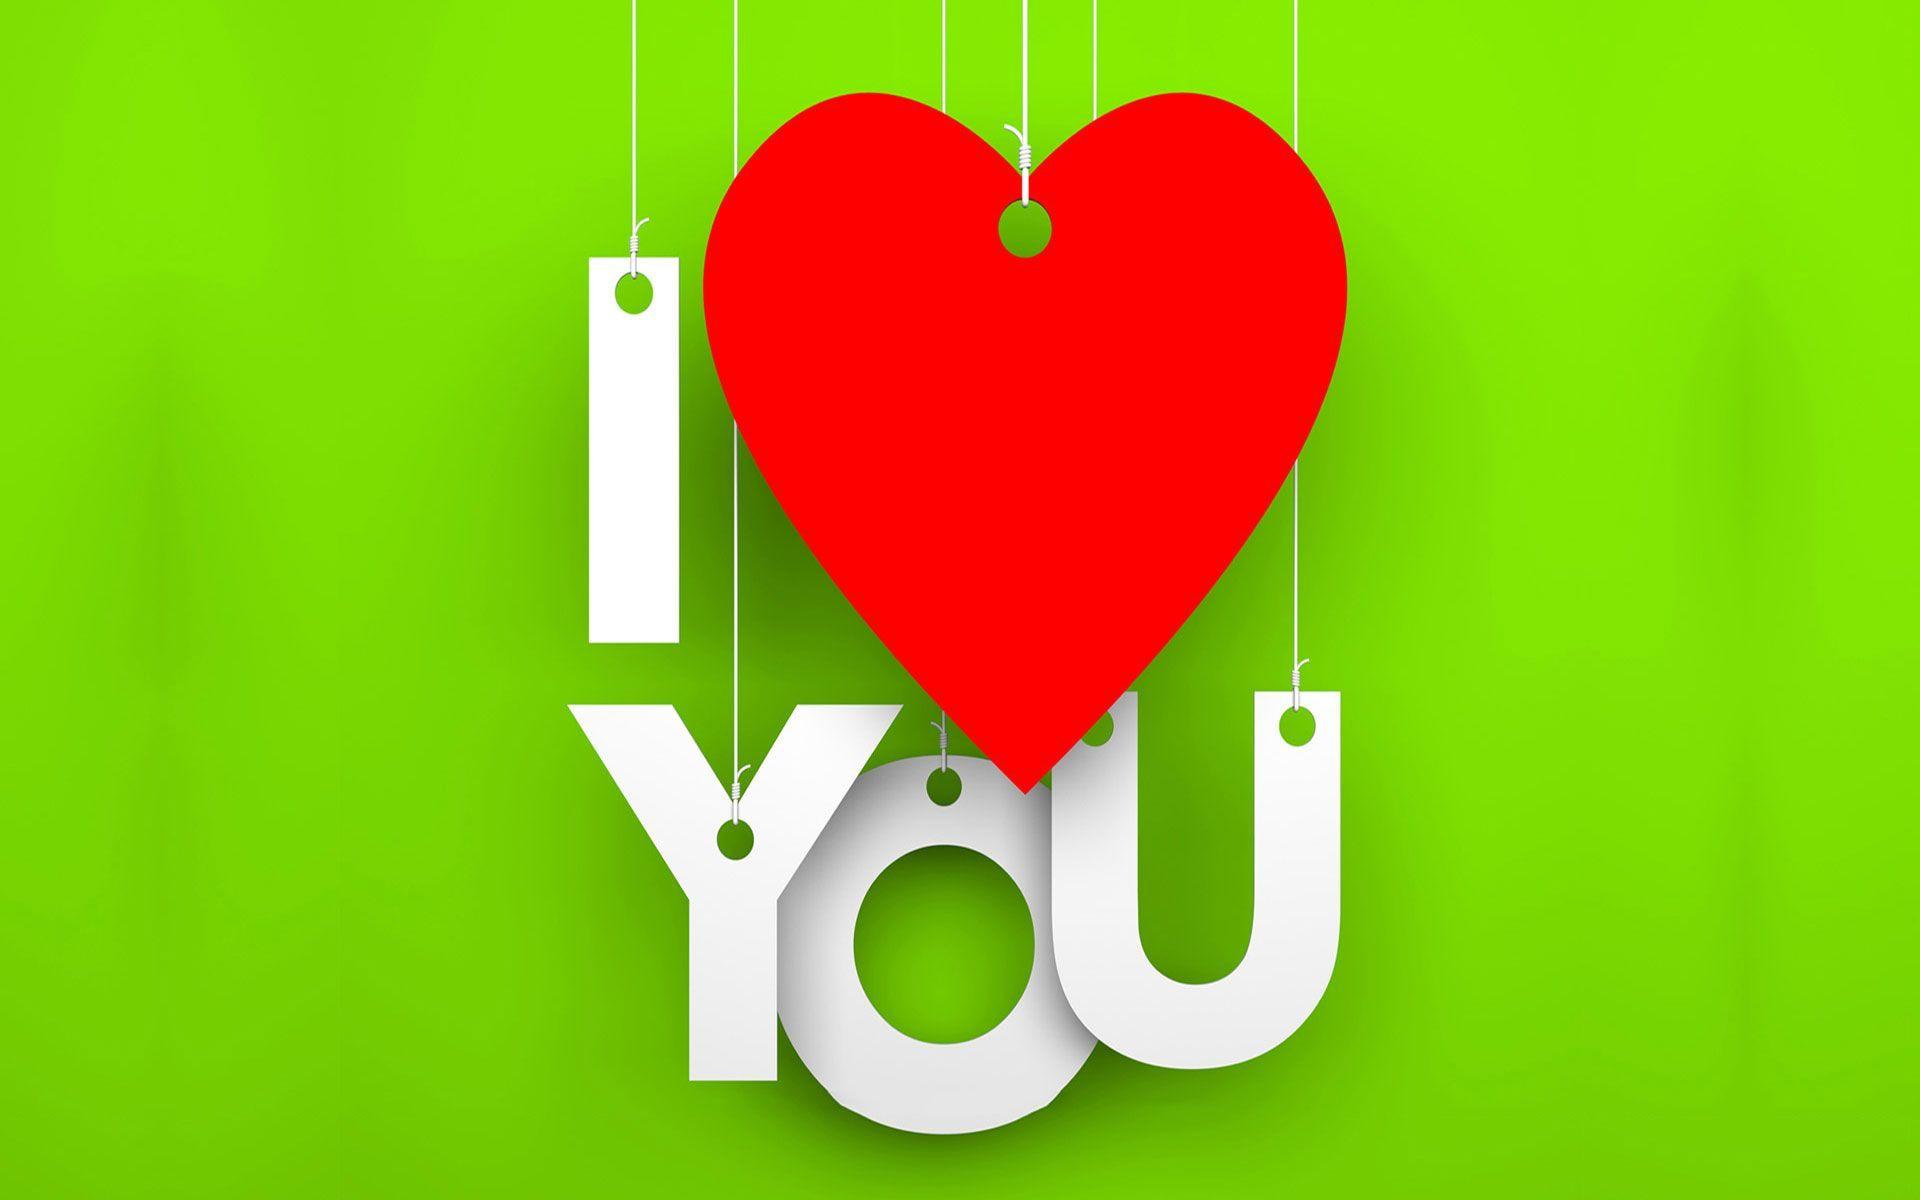 I Love You Wallpaper HD Green Background And Hanging Heart